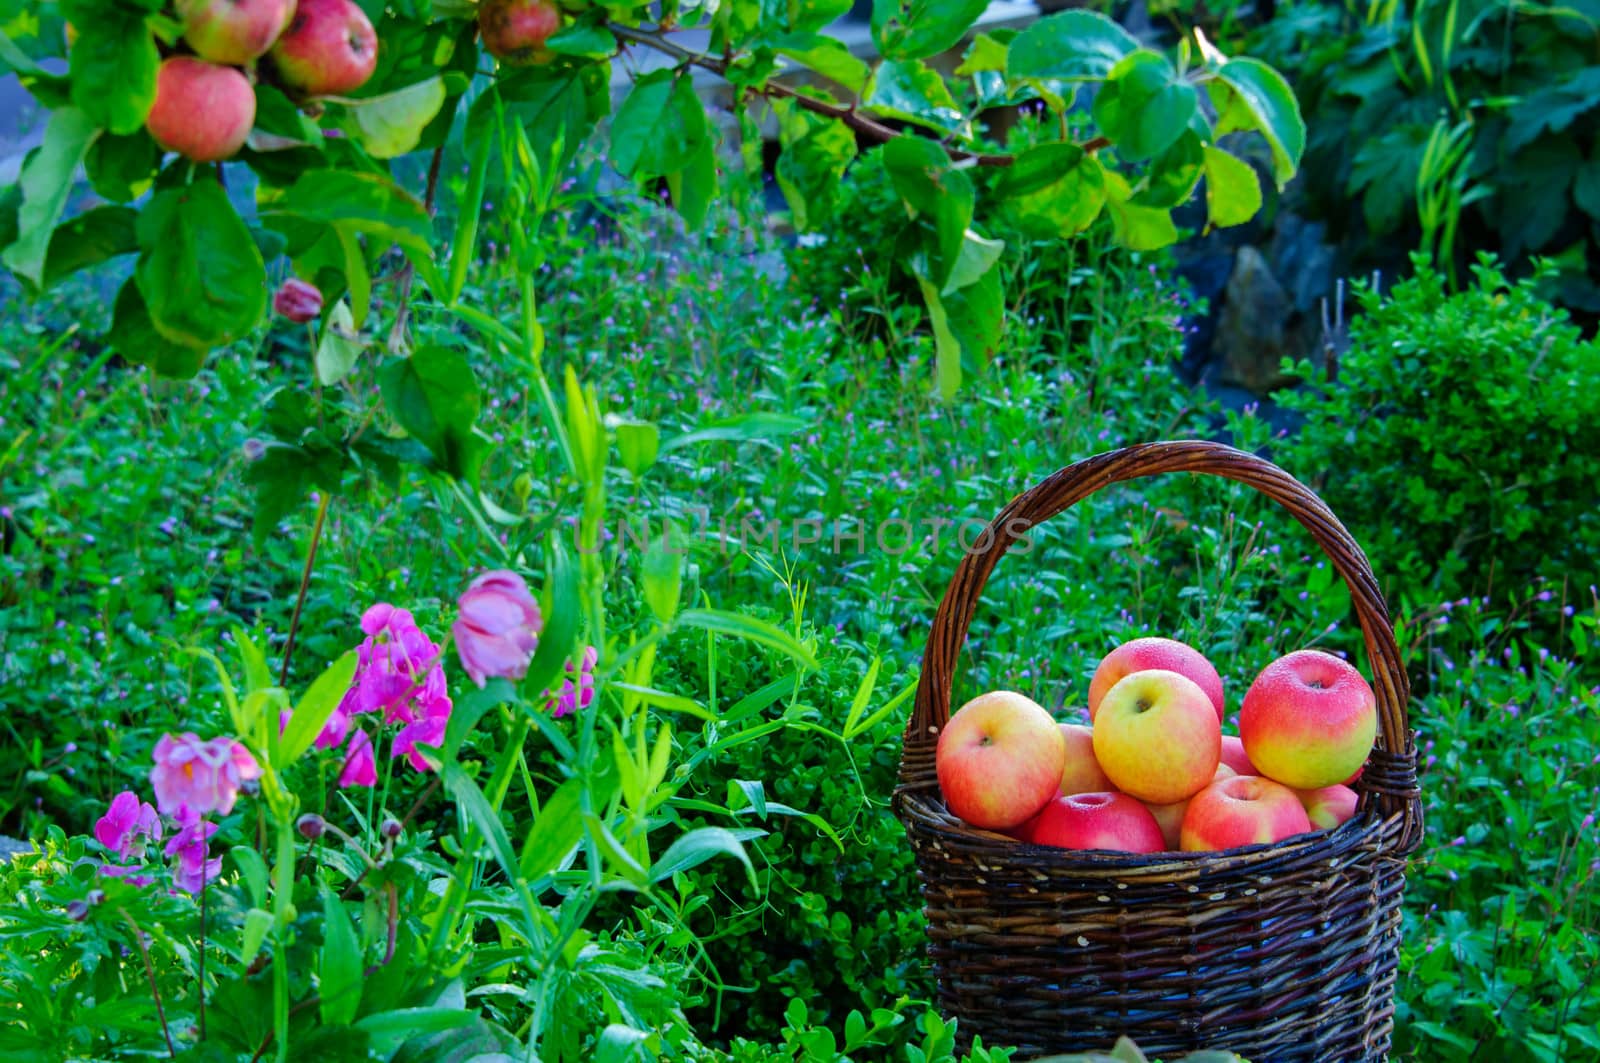 Harvesting red apples in a garden.  Apples in a basket, an apple tree and flowers